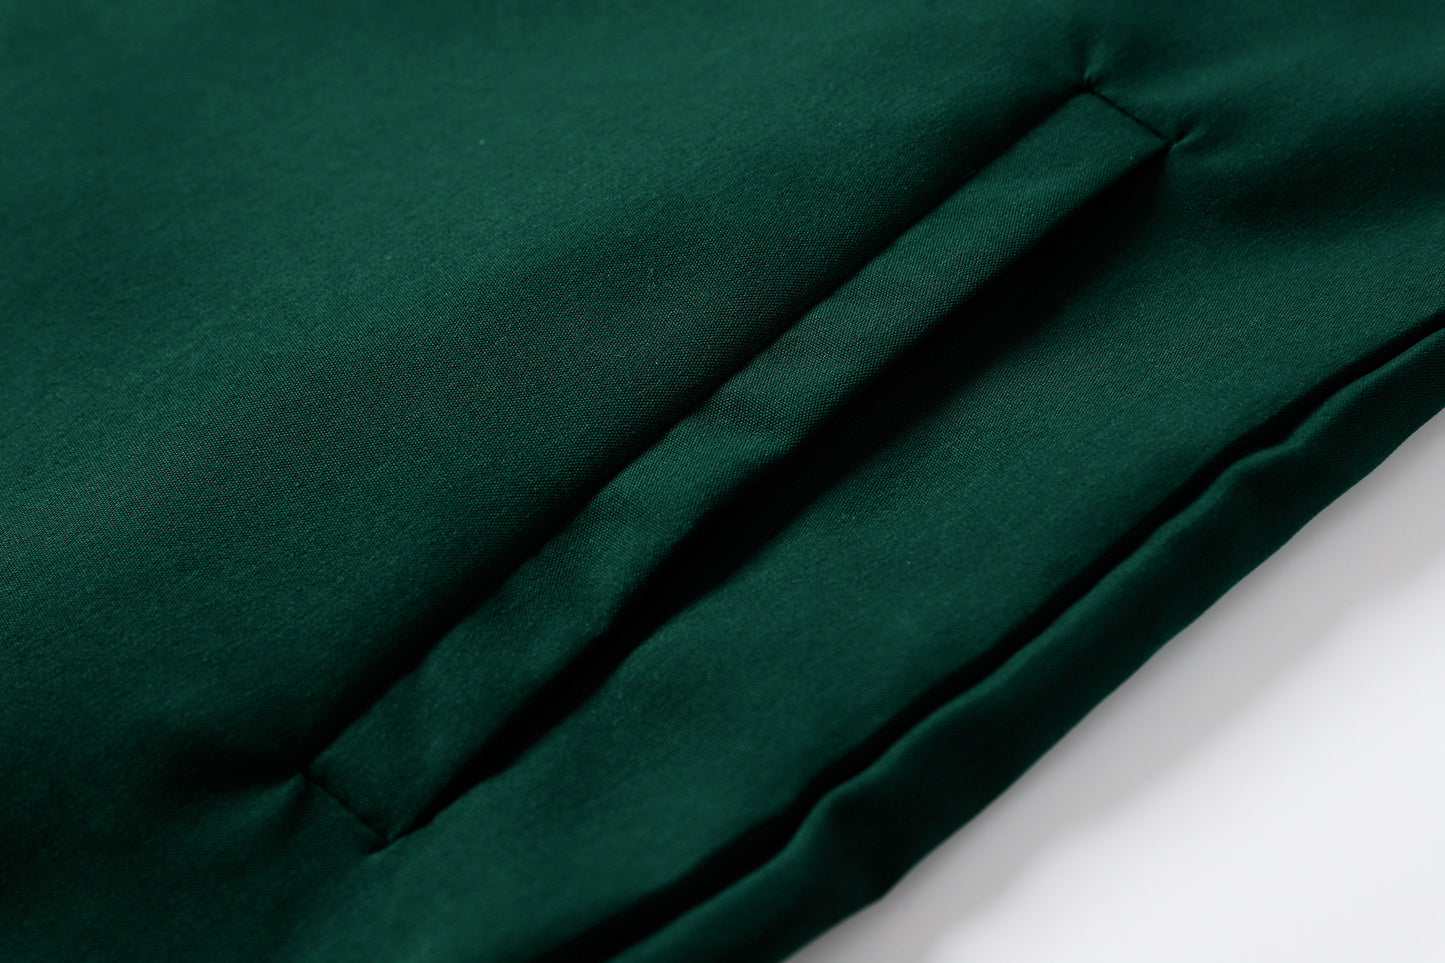 Qamis - Saudi Green with chest embroidery